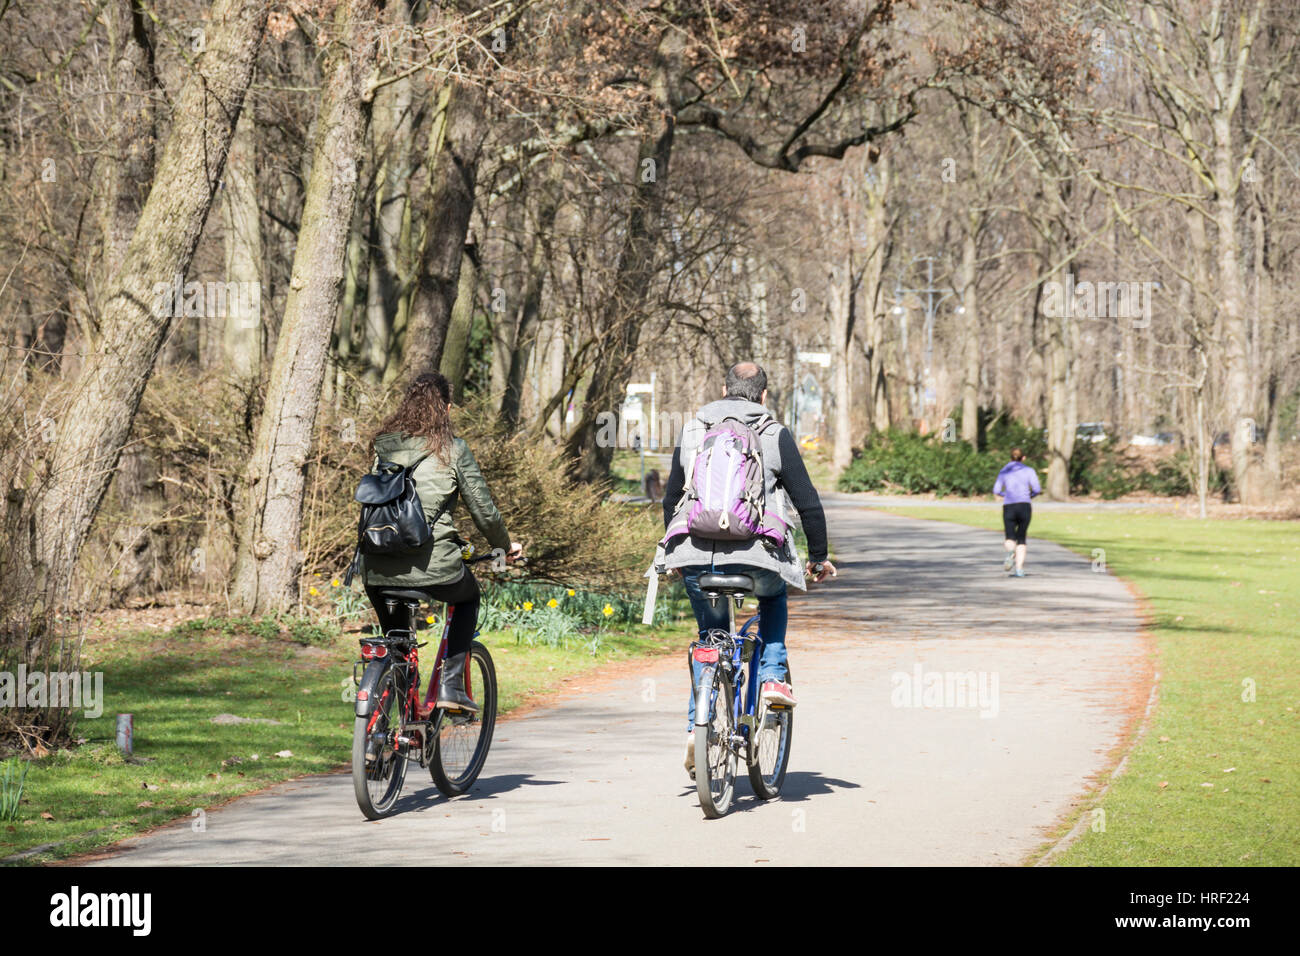 People cycling in a city park on a cold day. Tiergarten, Berlin, Germany Stock Photo